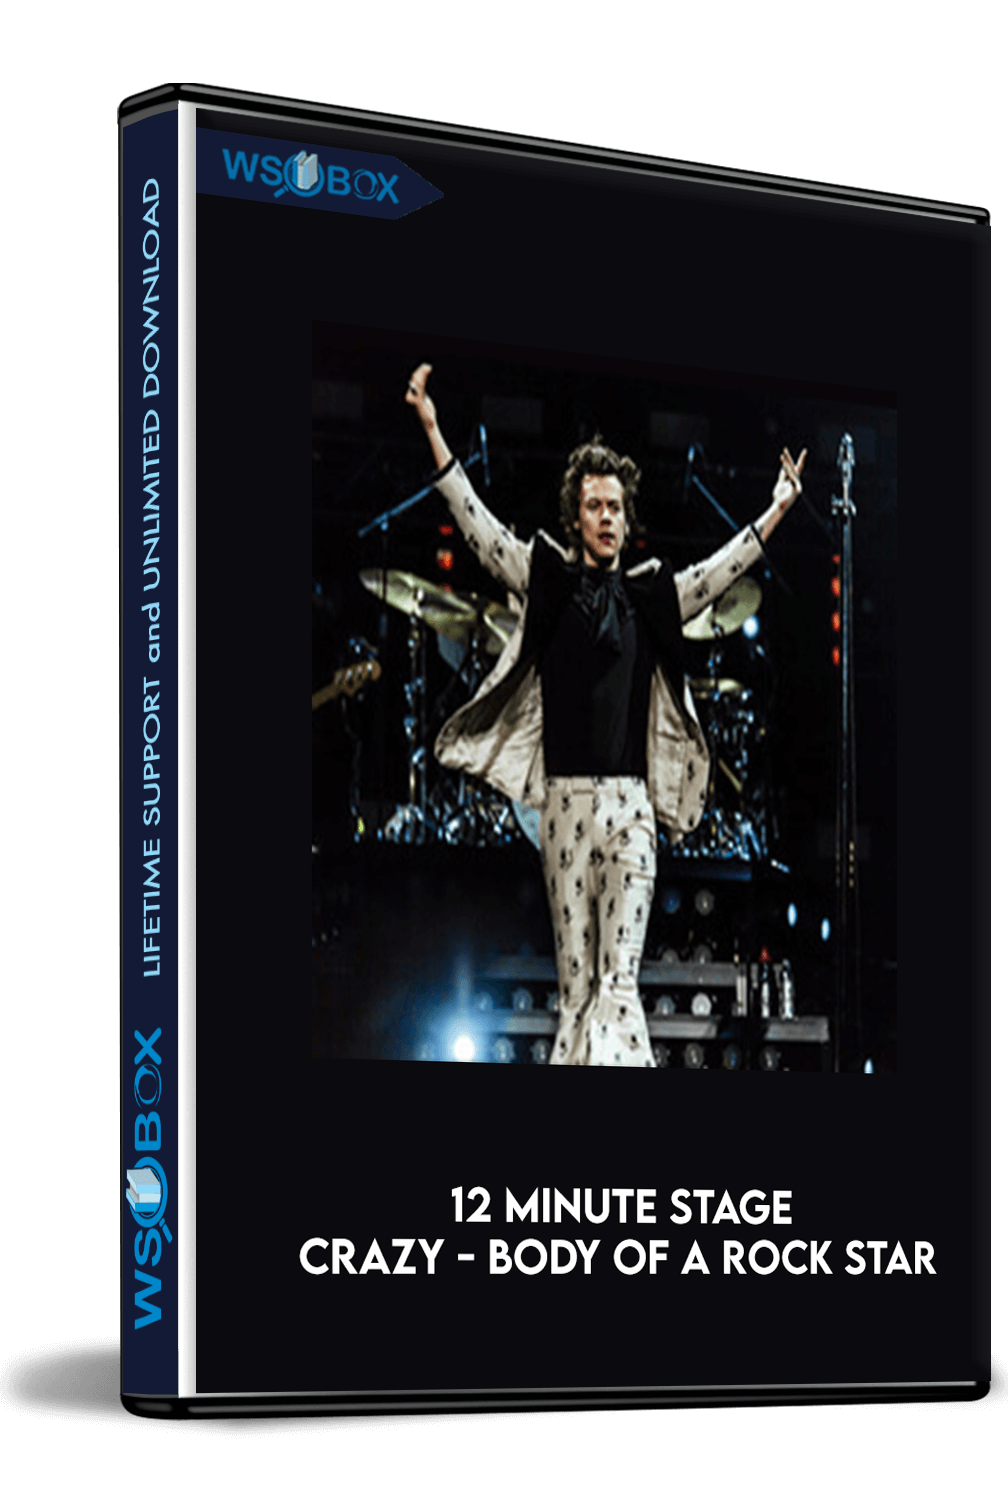 12 Minute Stage Crazy – Body of a Rock Star